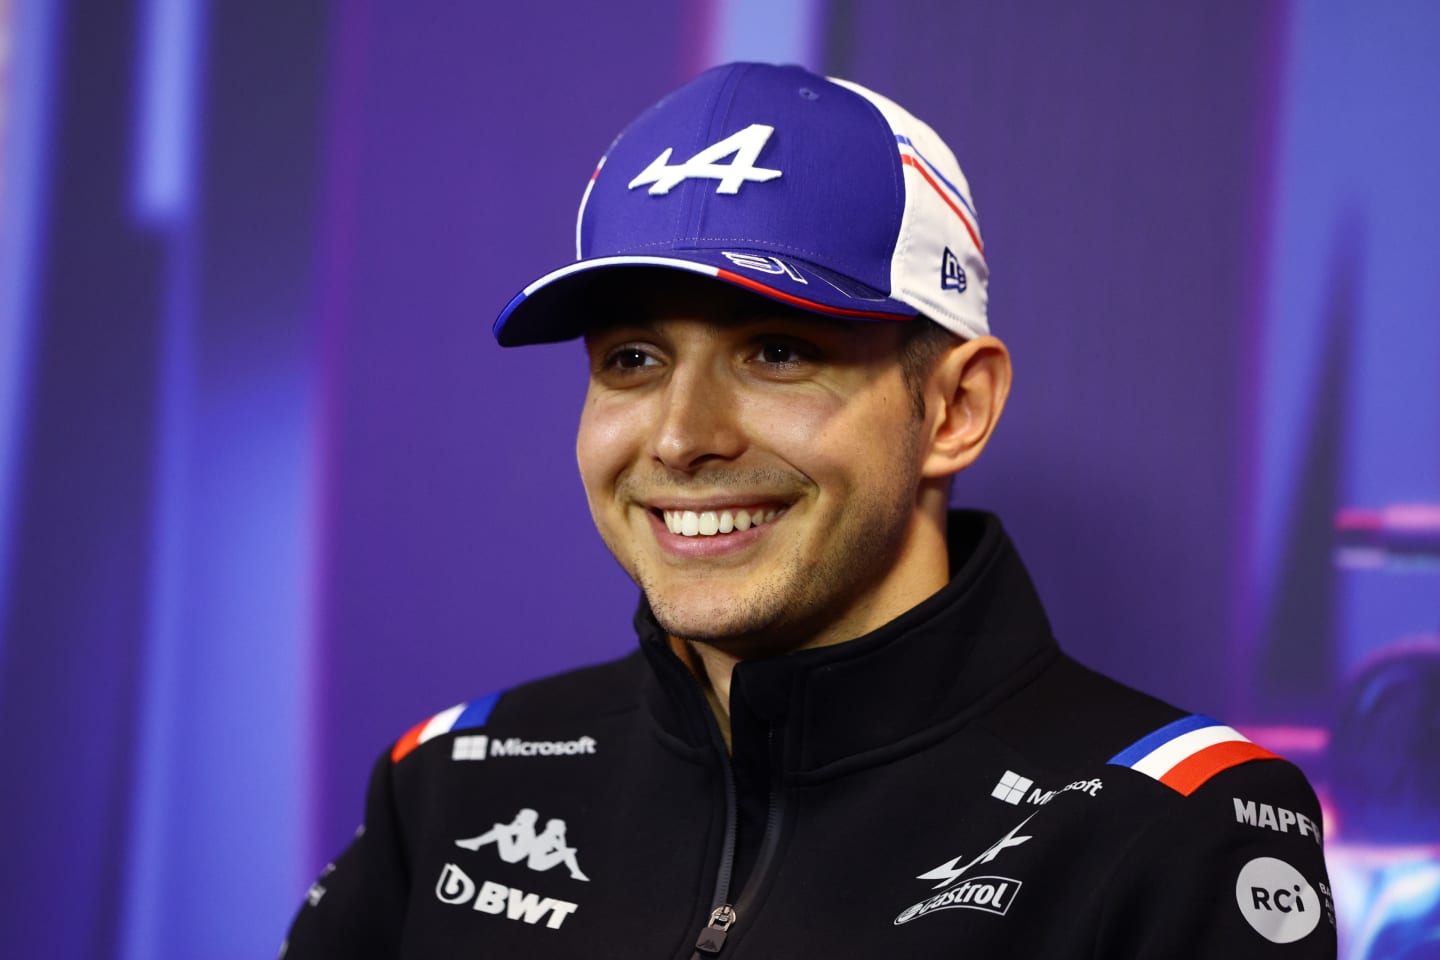 SINGAPORE, SINGAPORE - SEPTEMBER 29: Esteban Ocon of France and Alpine F1 attends the Drivers Press Conference during previews ahead of the F1 Grand Prix of Singapore at Marina Bay Street Circuit on September 29, 2022 in Singapore, Singapore. (Photo by Clive Rose/Getty Images,)